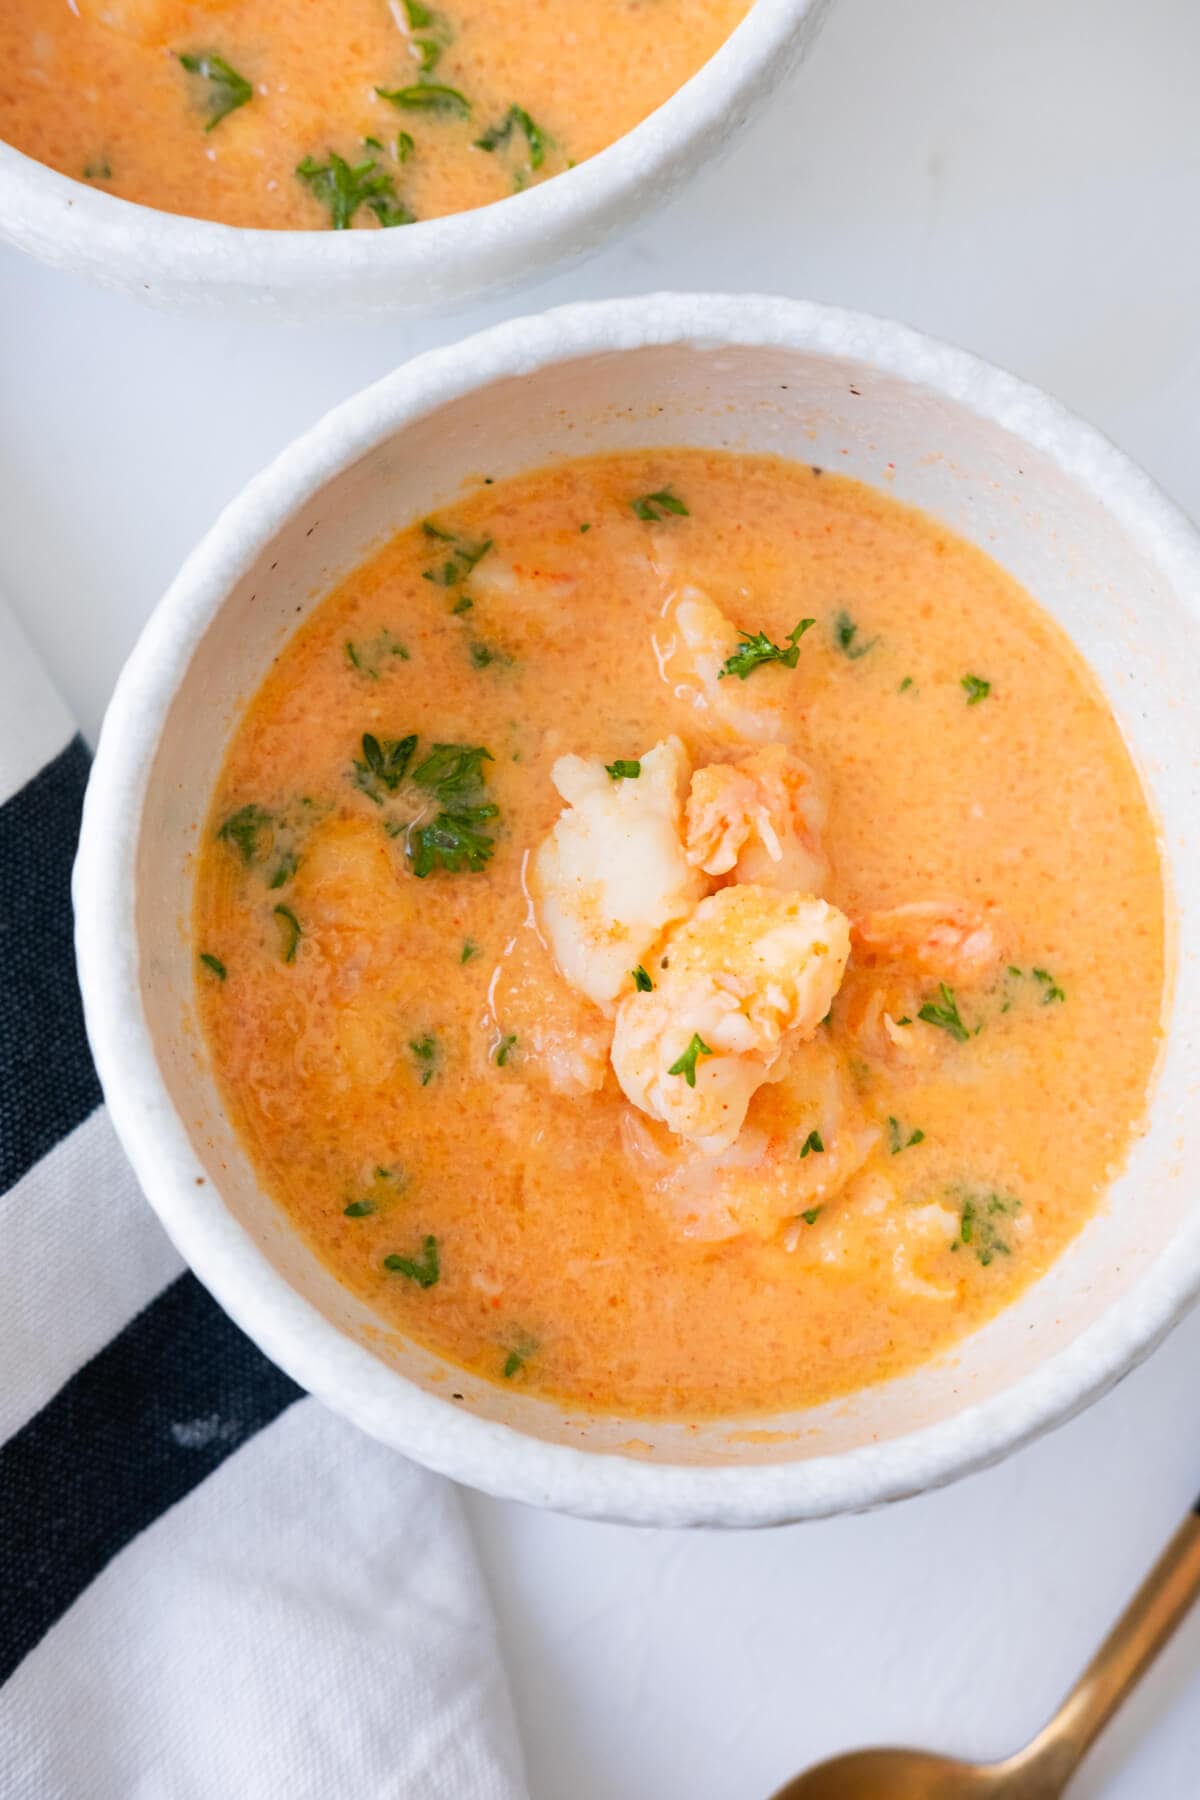 Shrimp bisque in a small white bowl with kitchen towel and a spoon placed aside.  